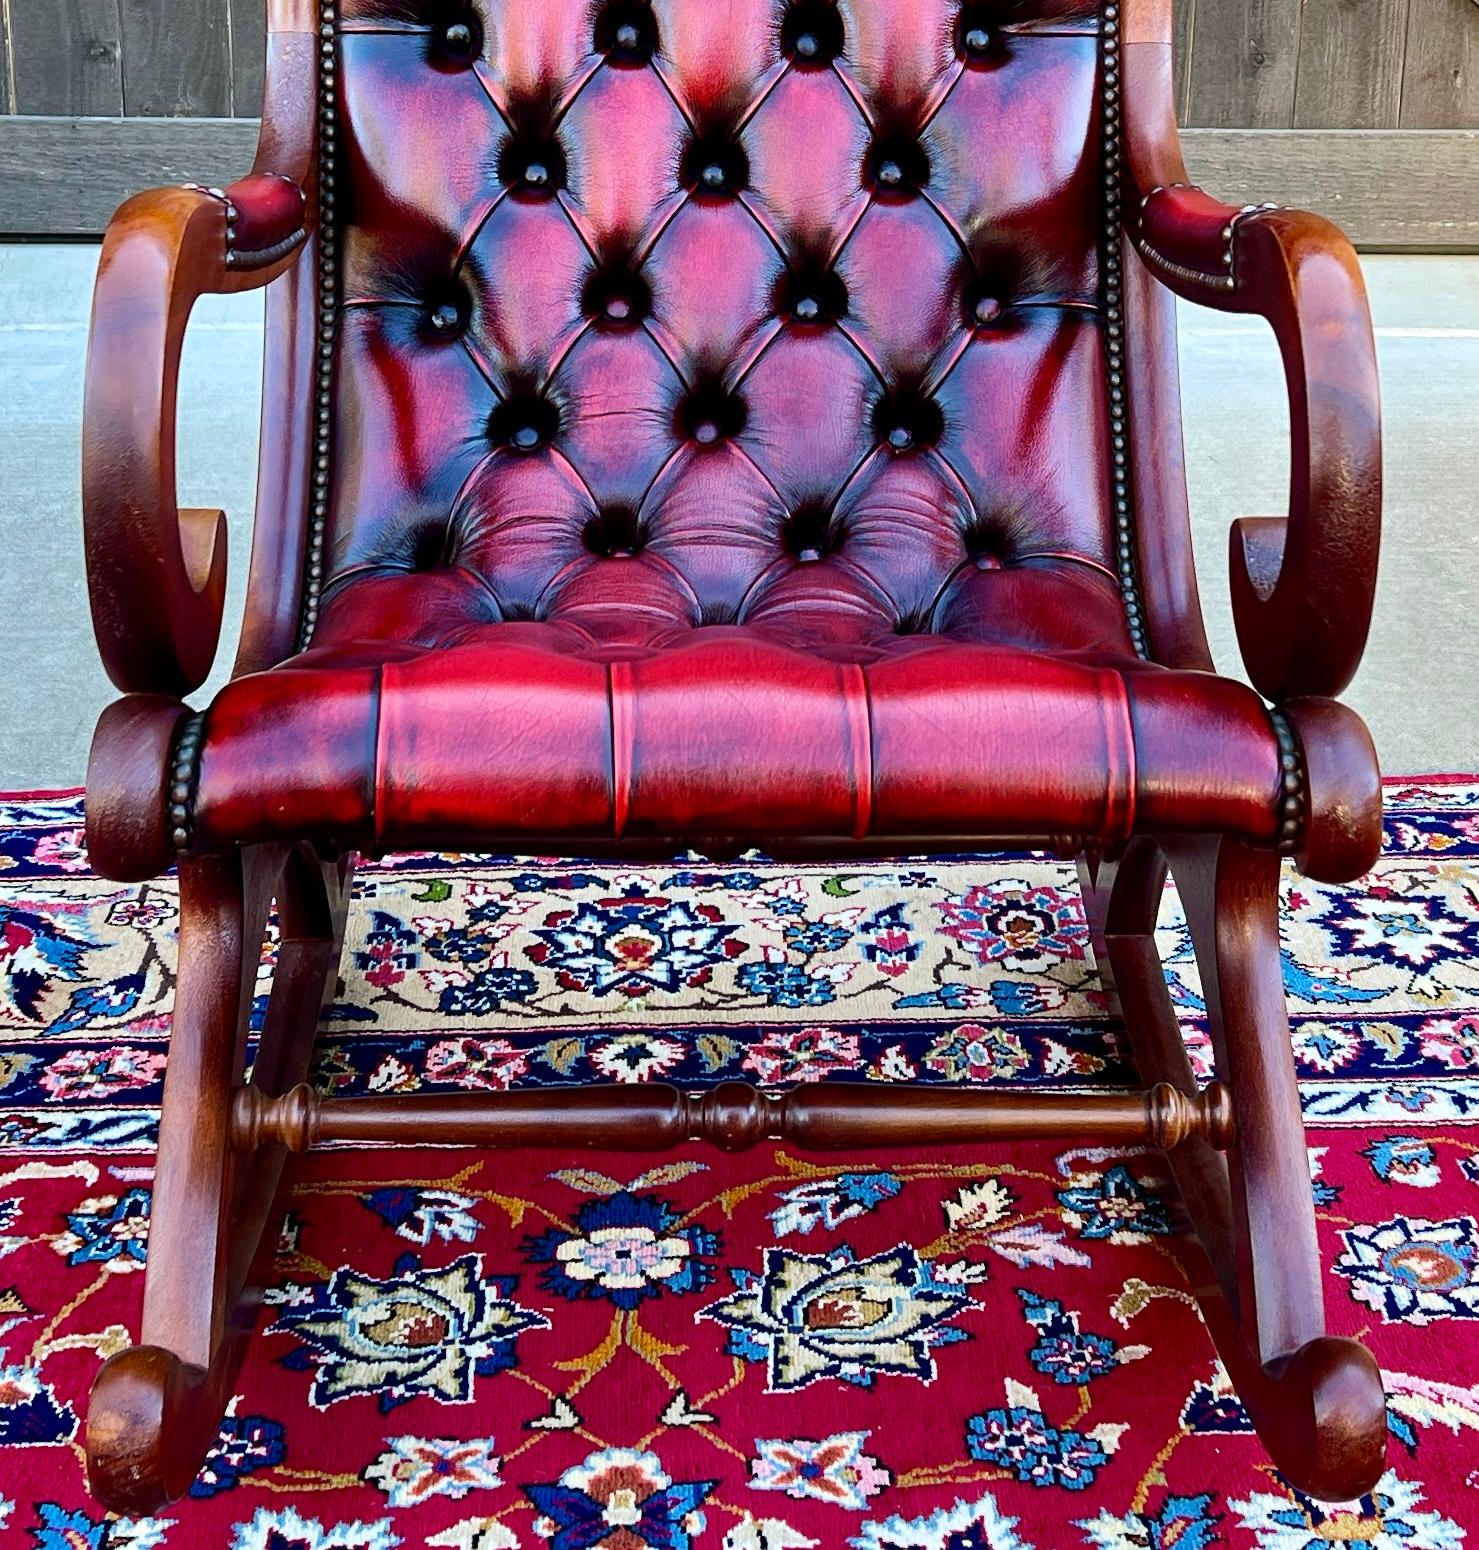 TIMELESS Vintage Mid-Century English Leather Tufted Seat CHESTERFIELD Rocking Chair in Oxblood Red

PERFECT ICONIC look for a gentleman's office, study, library, or cigar lounge~~upholstery is oxblood red in color~~timeless traditional style!

A